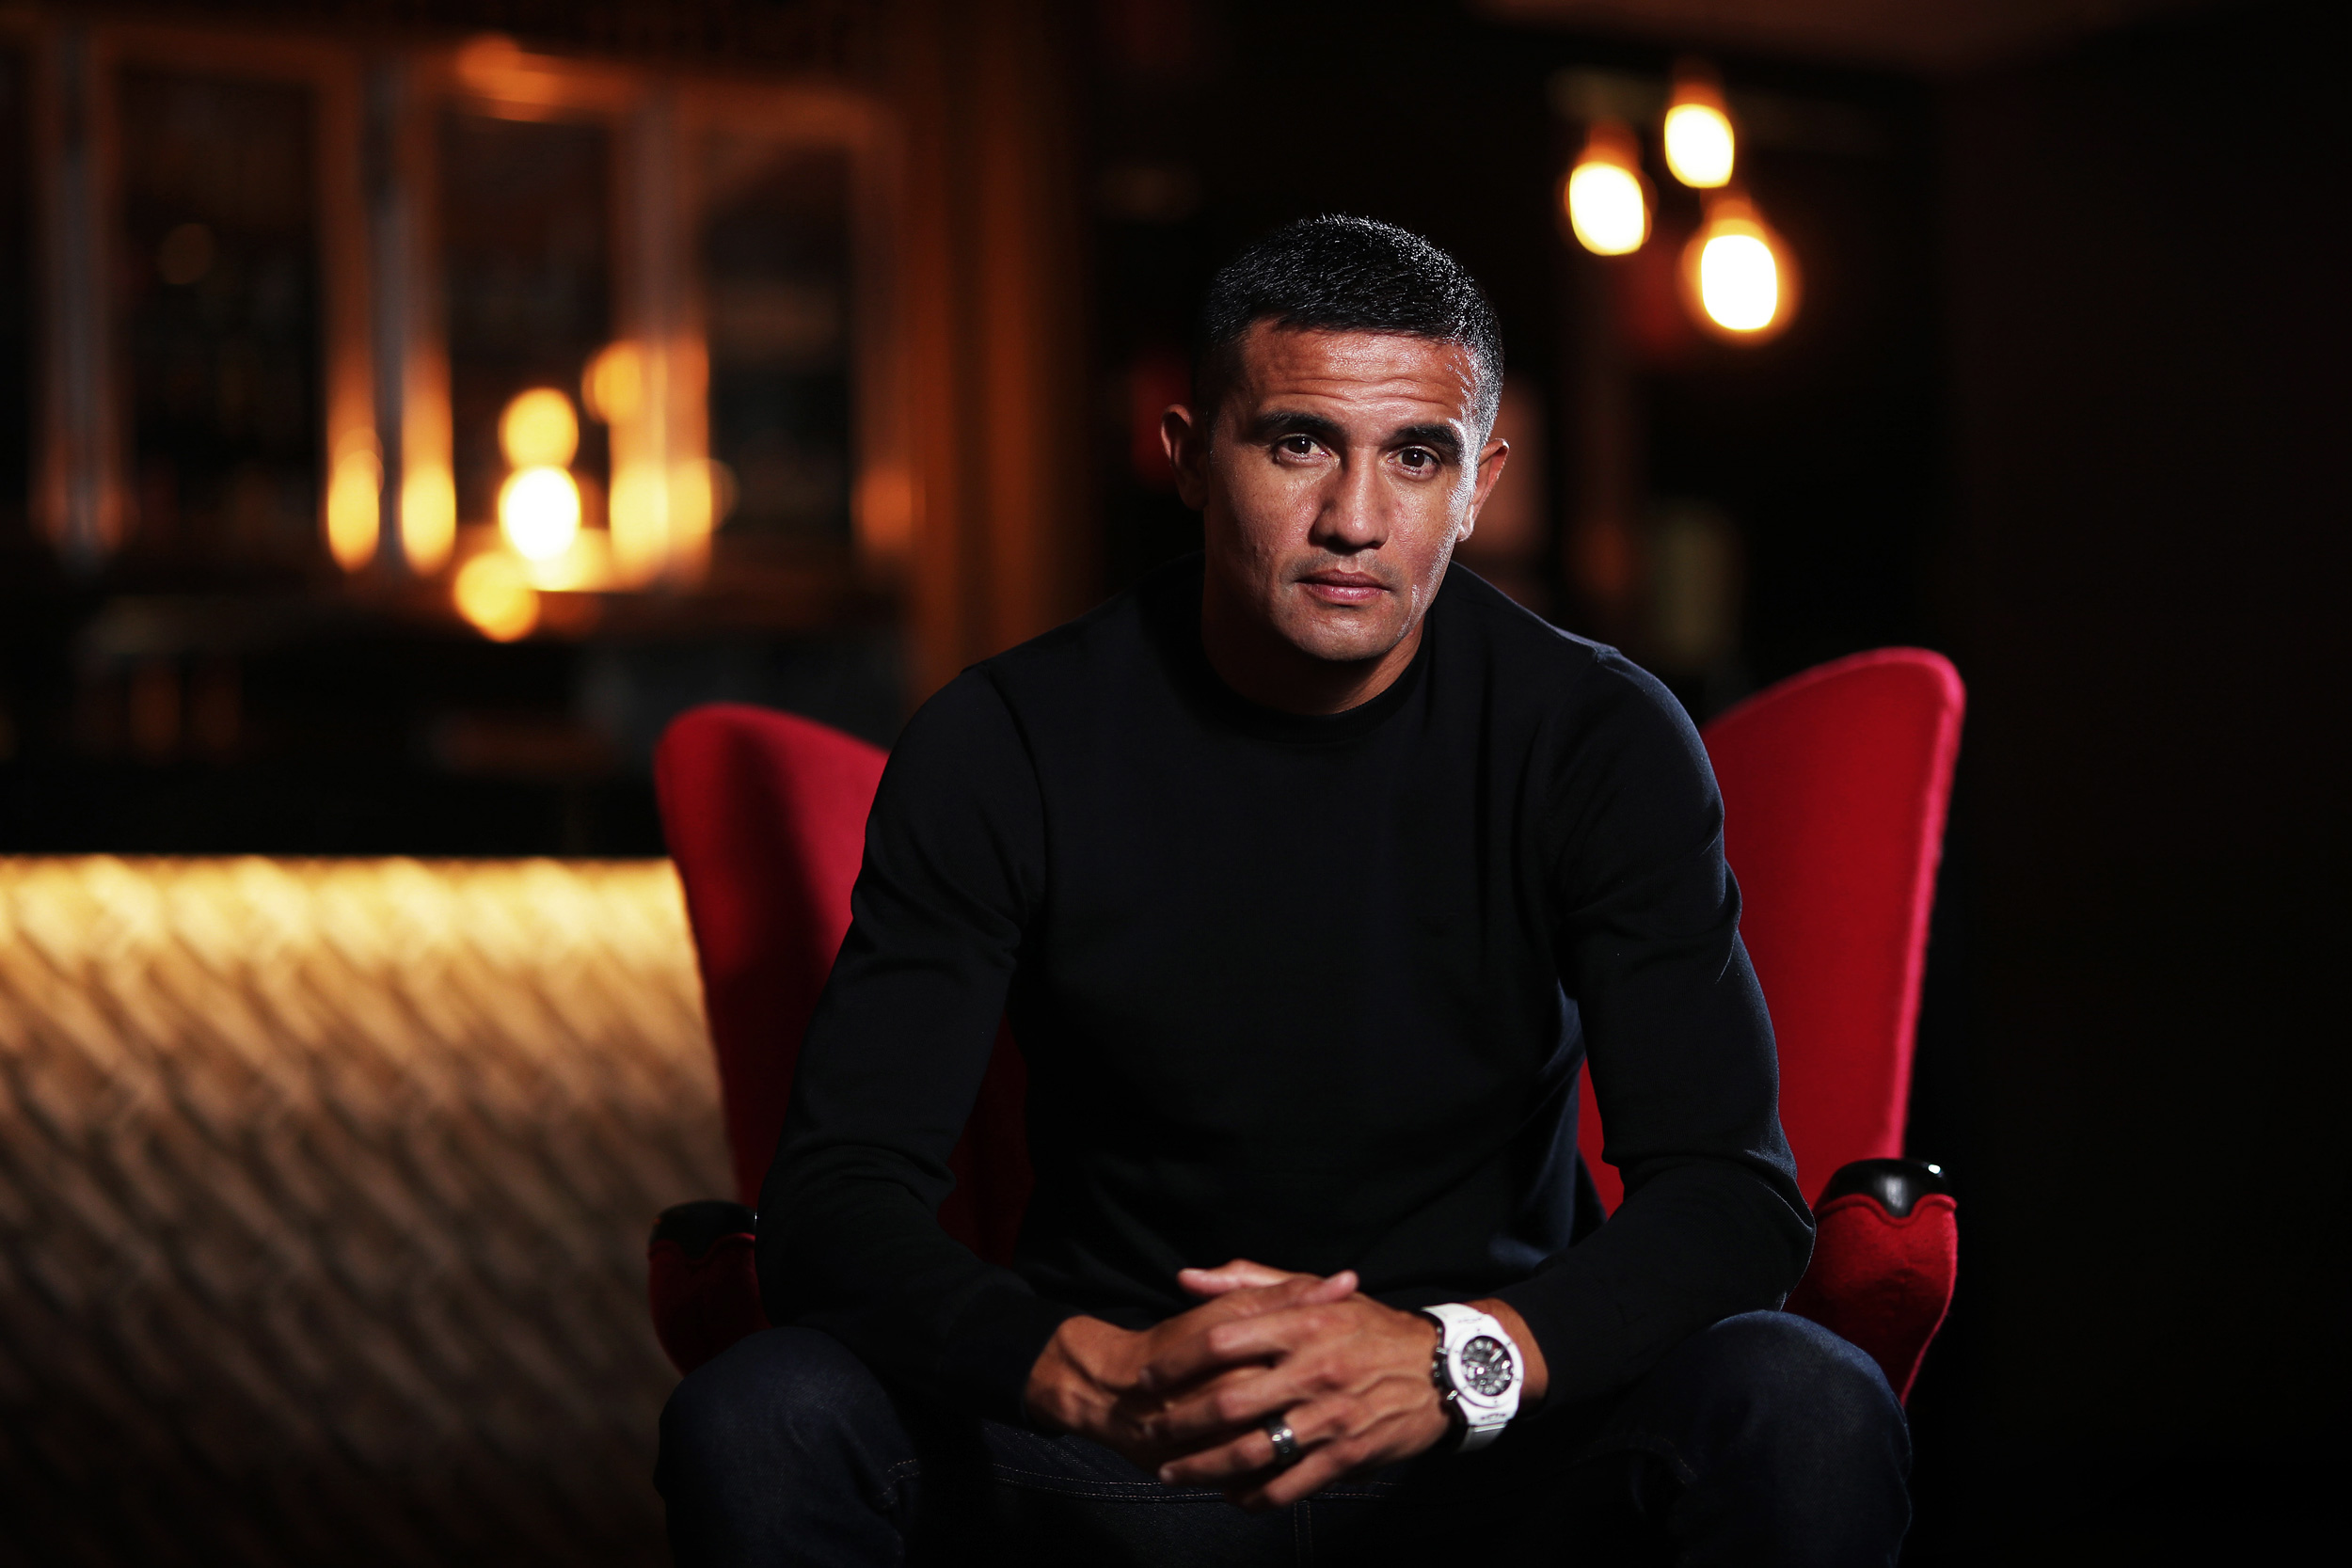 Tim Cahill exclusive interview and pic opp